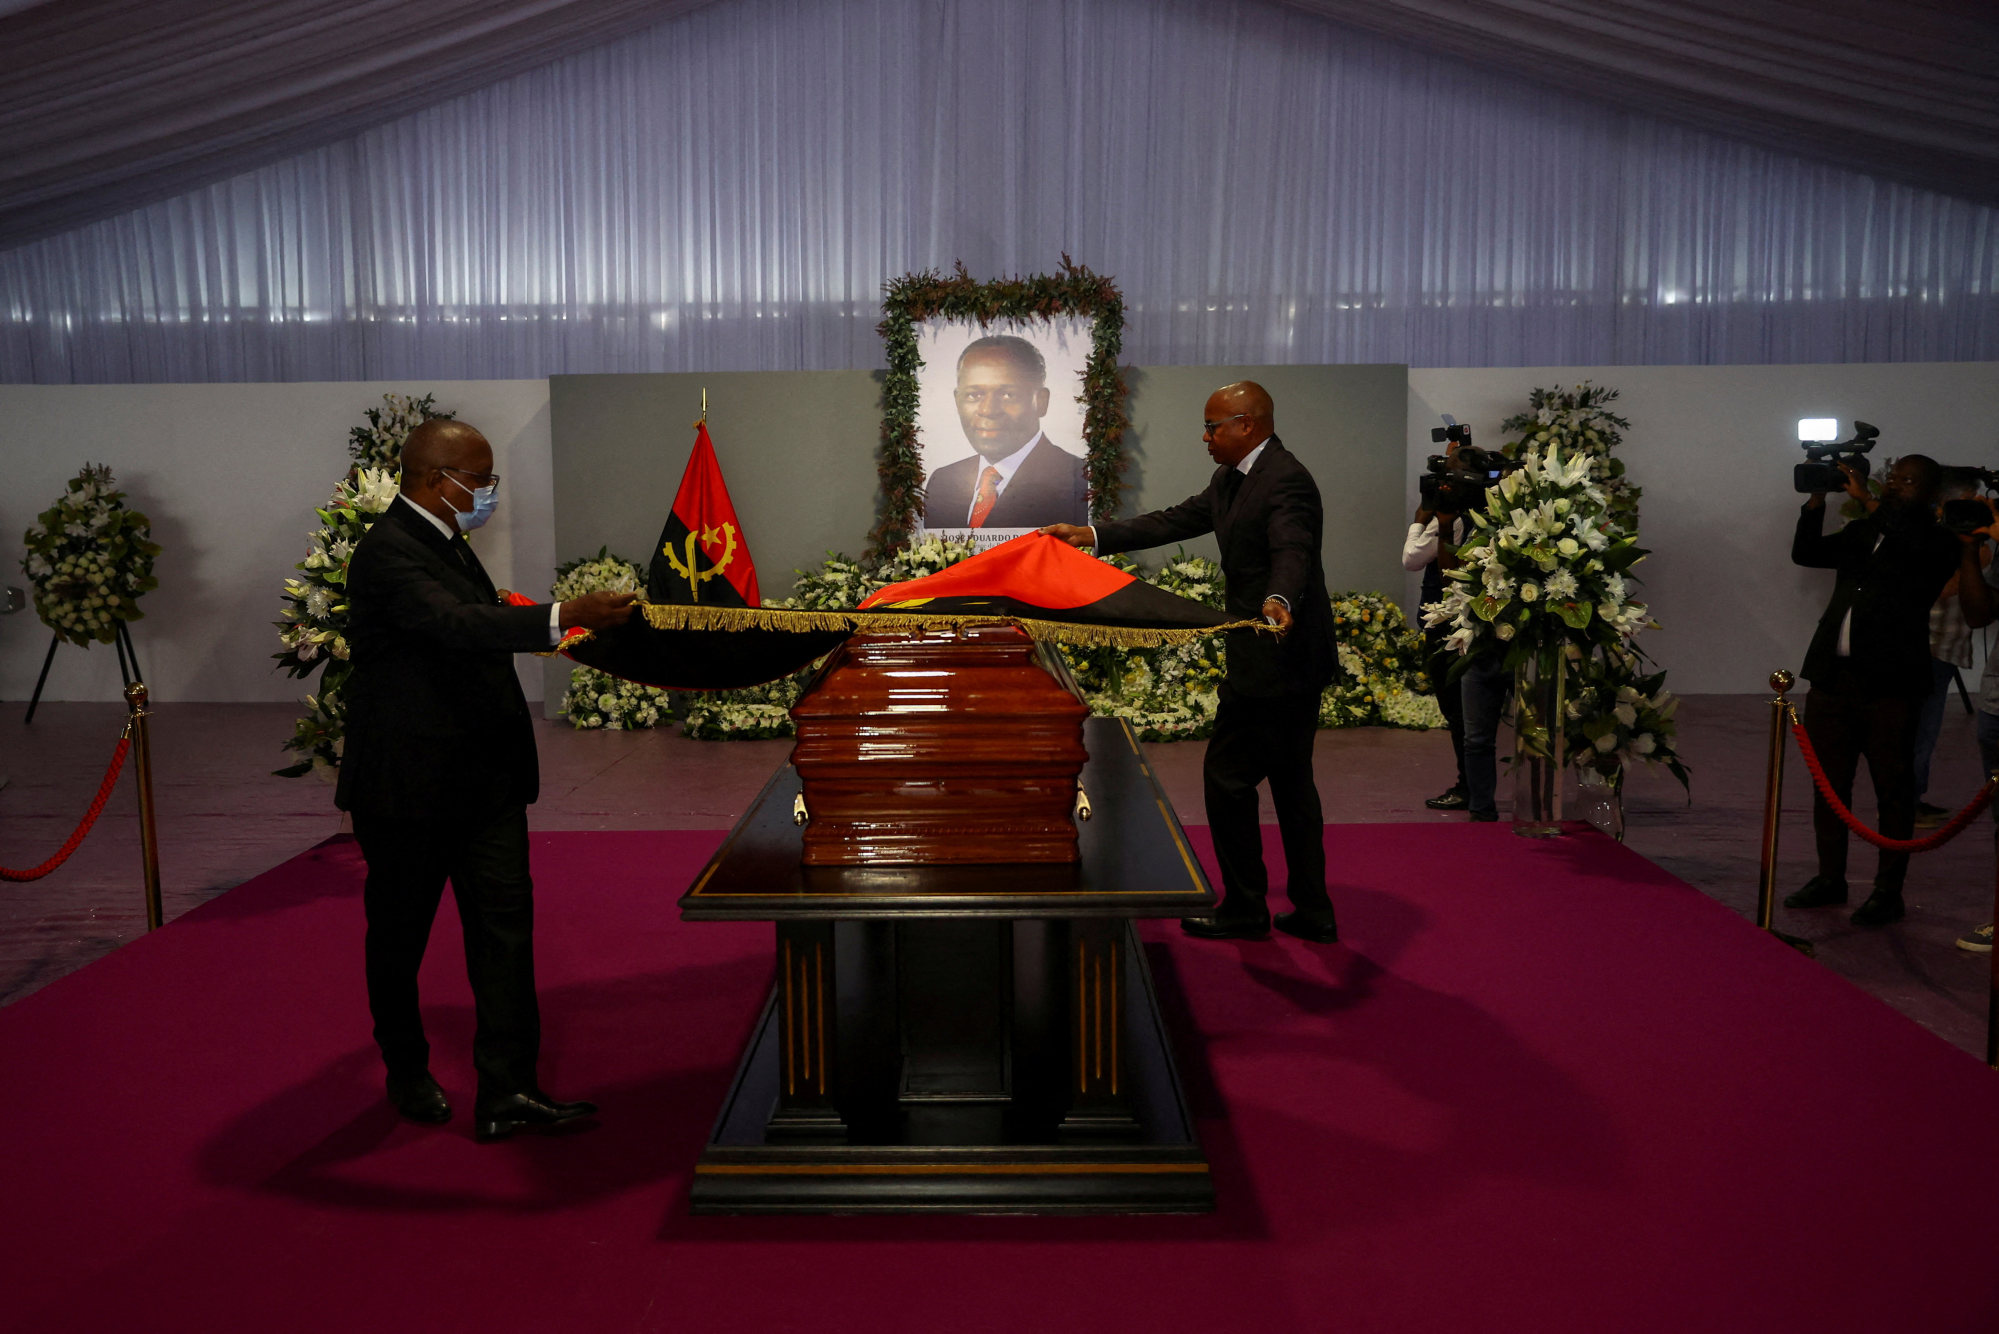 Angola holds funeral of ex-leader Dos Santos amid dispute over vote